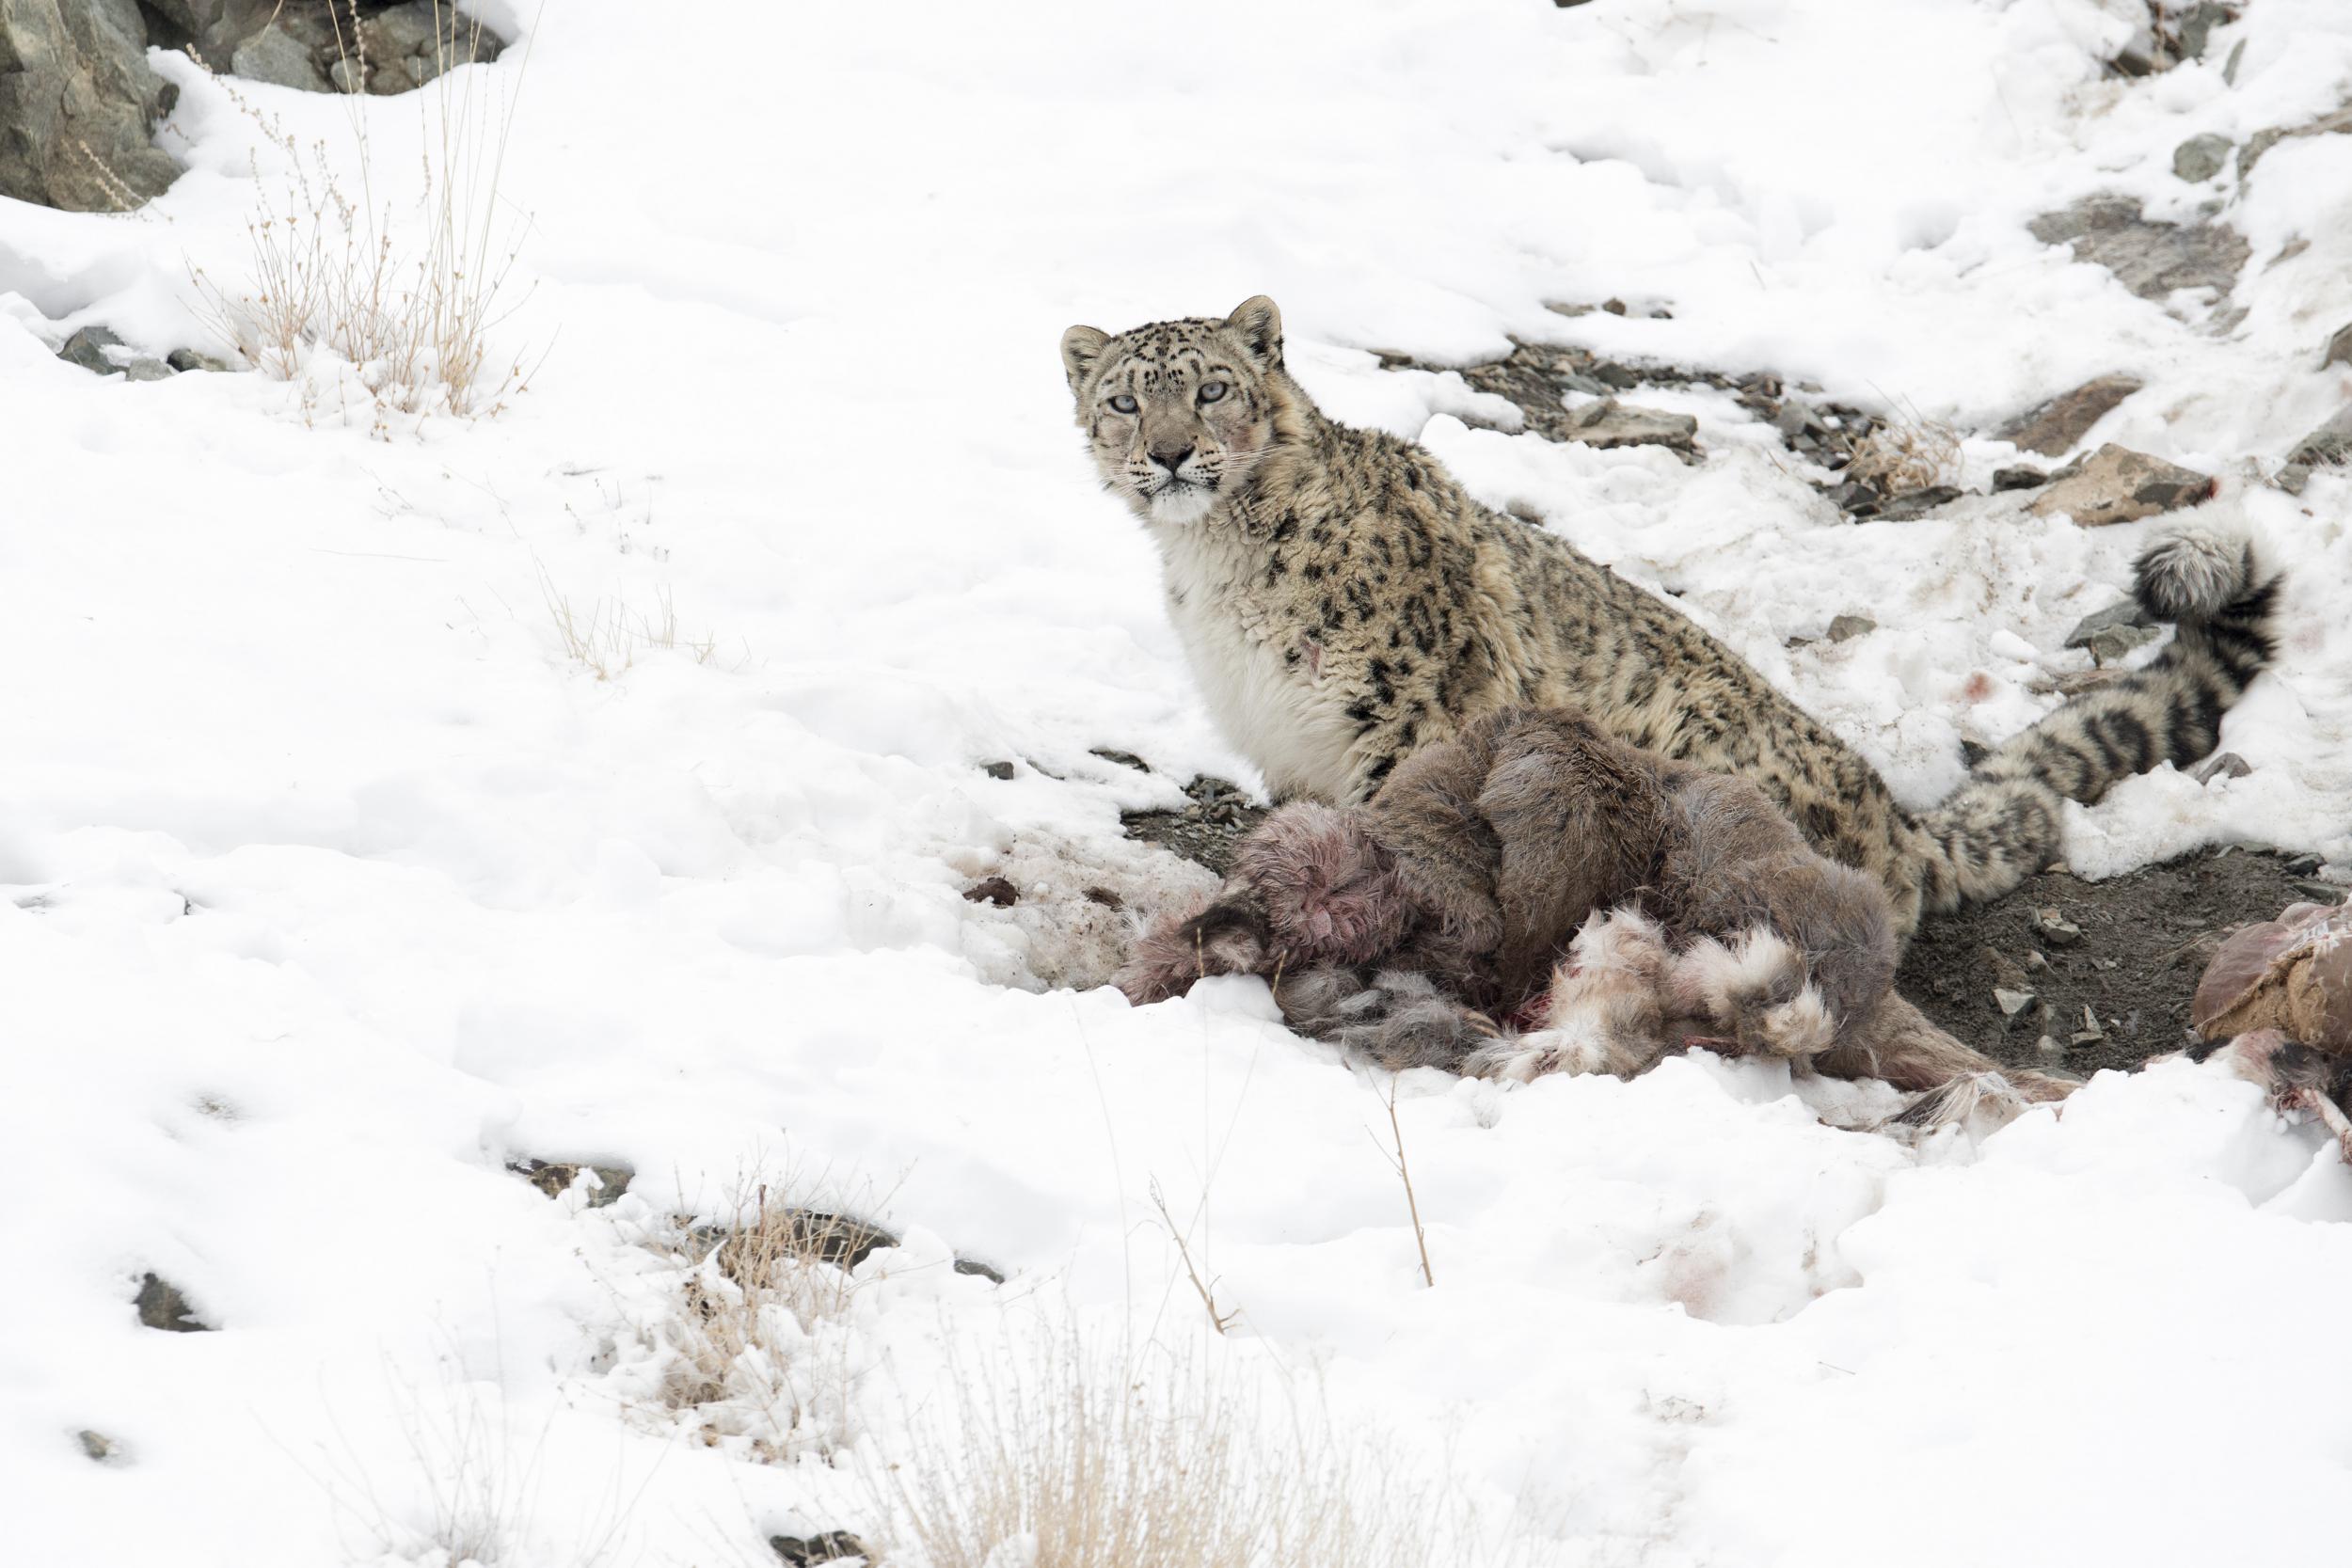 Blink and you’ll miss the Himalayan snow leopard